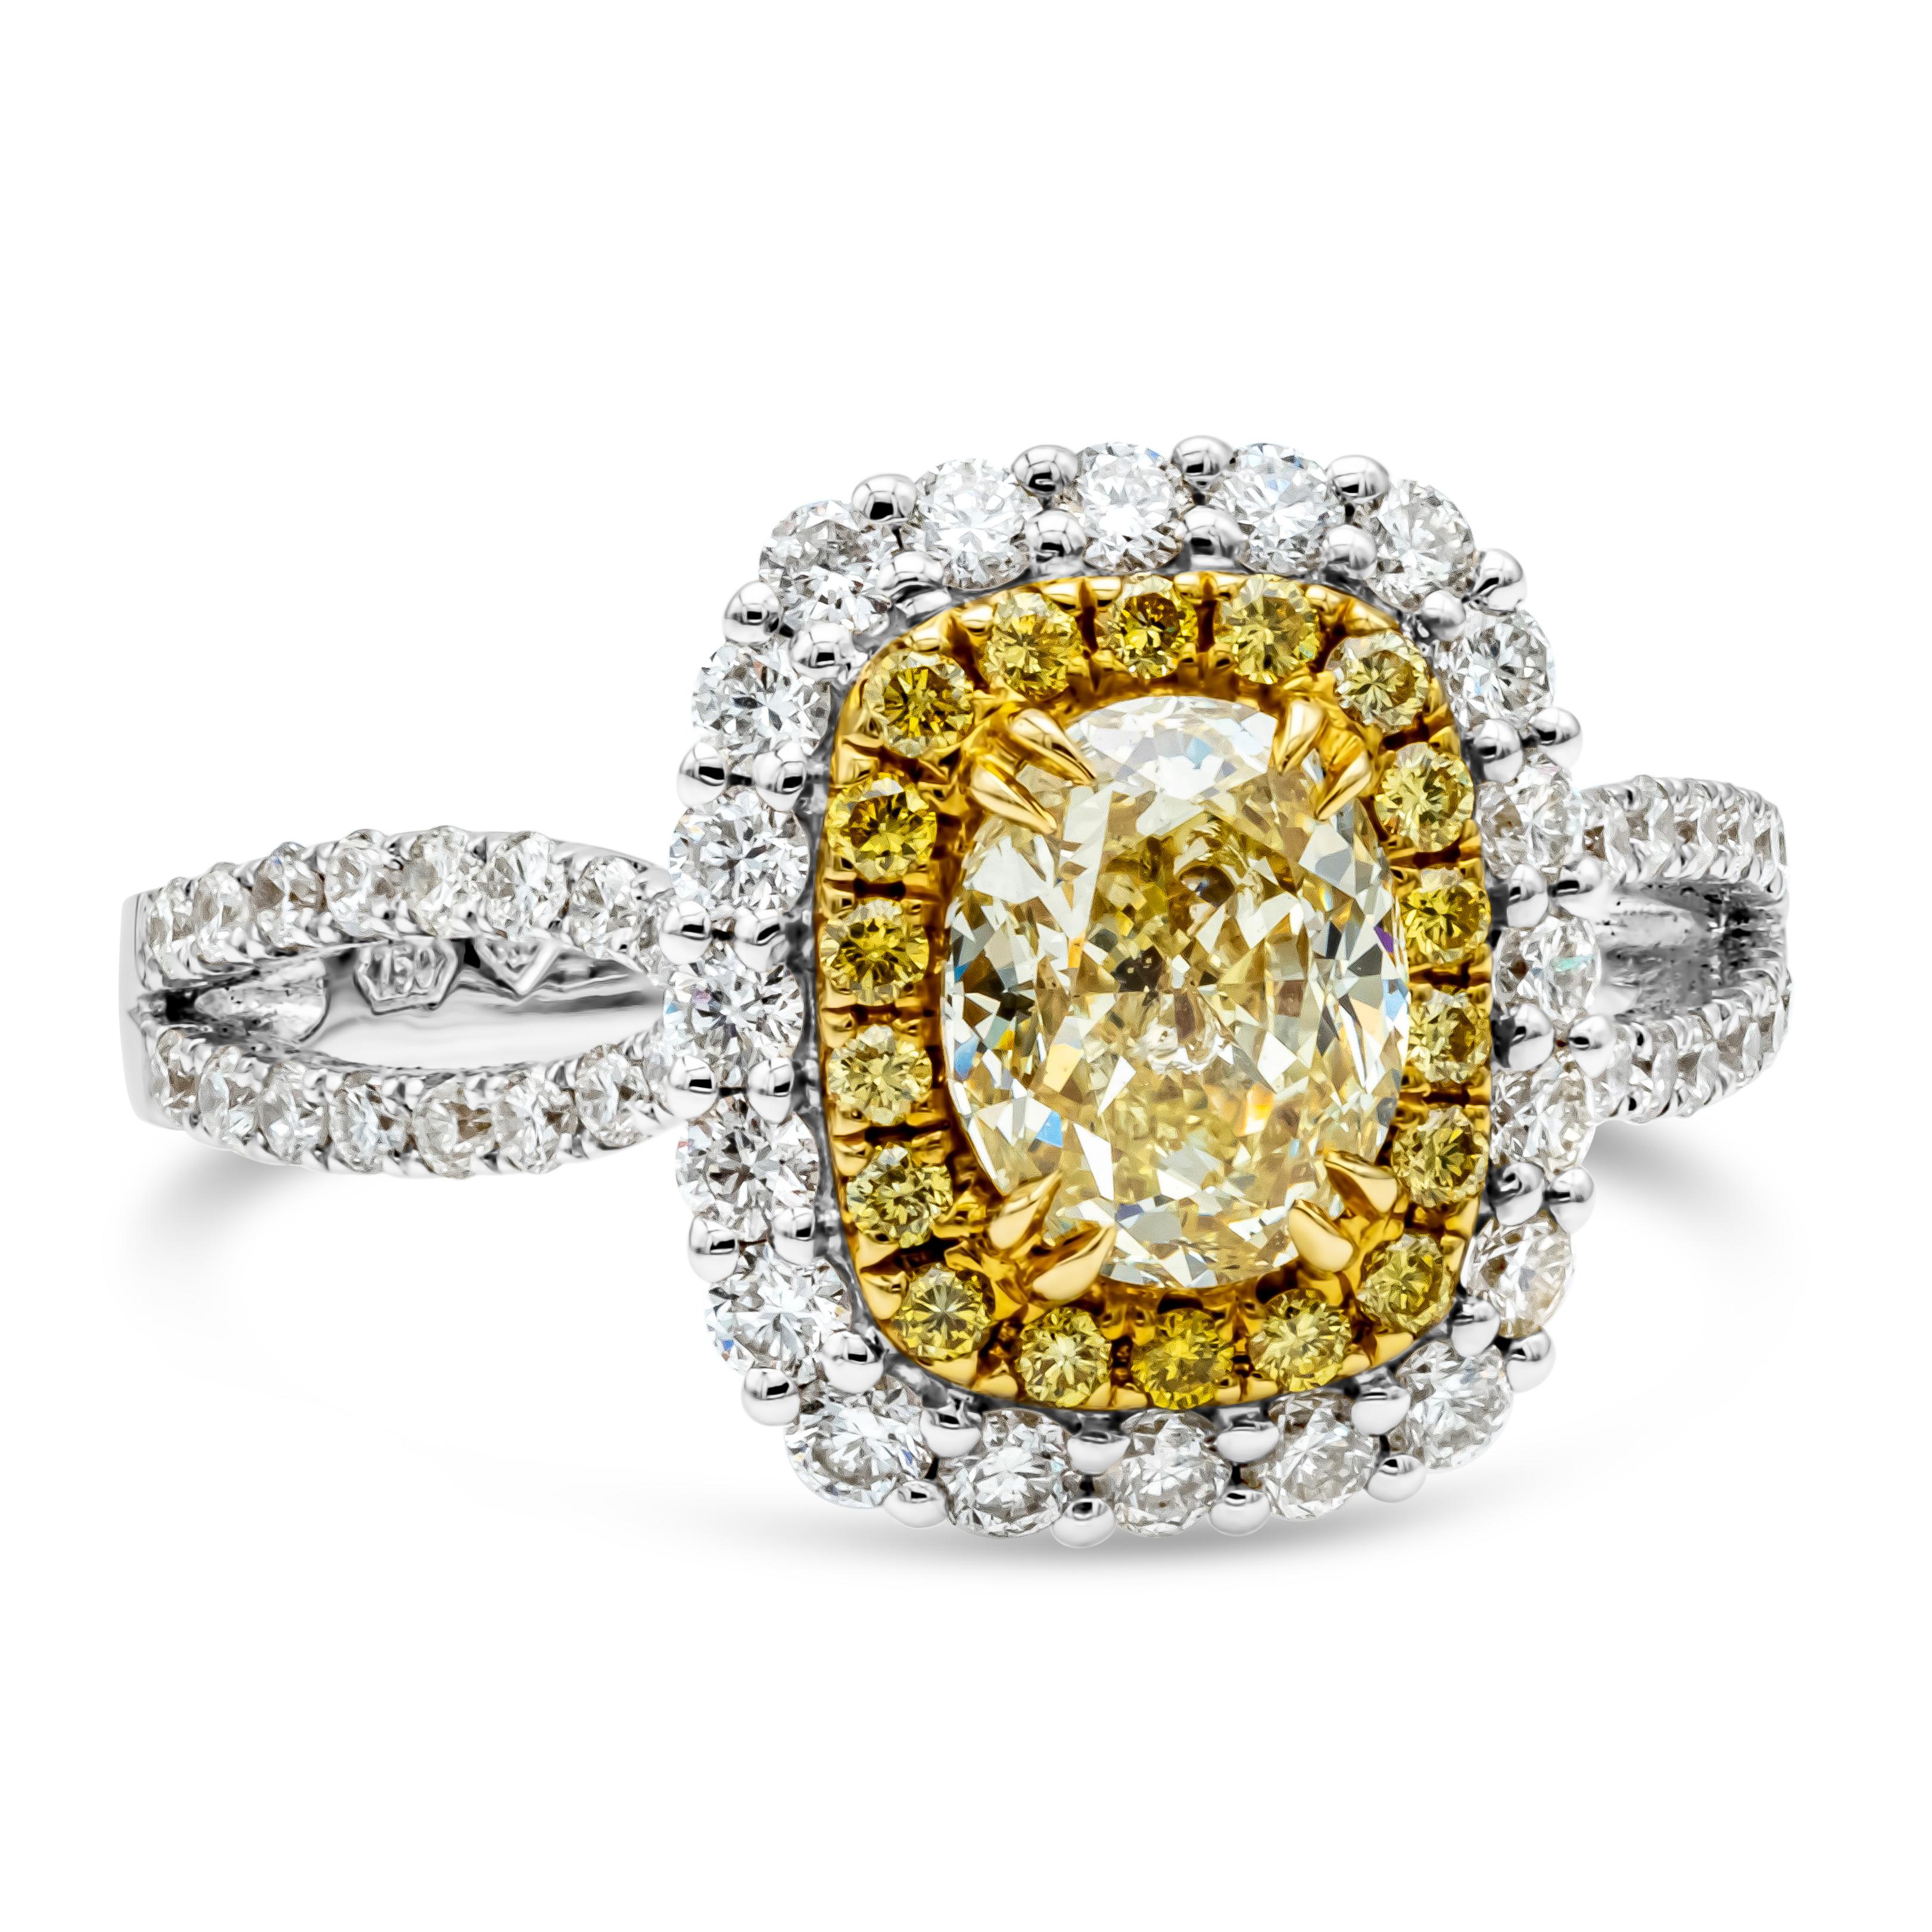 A color-rich and vibrant double halo engagement ring, featuring 1.17 carats oval cut diamond certified by GIA as Fancy Light Yellow color and VS2 clarity, set on a yellow gold four prong basket setting. Surrounded by a double row of round brilliant